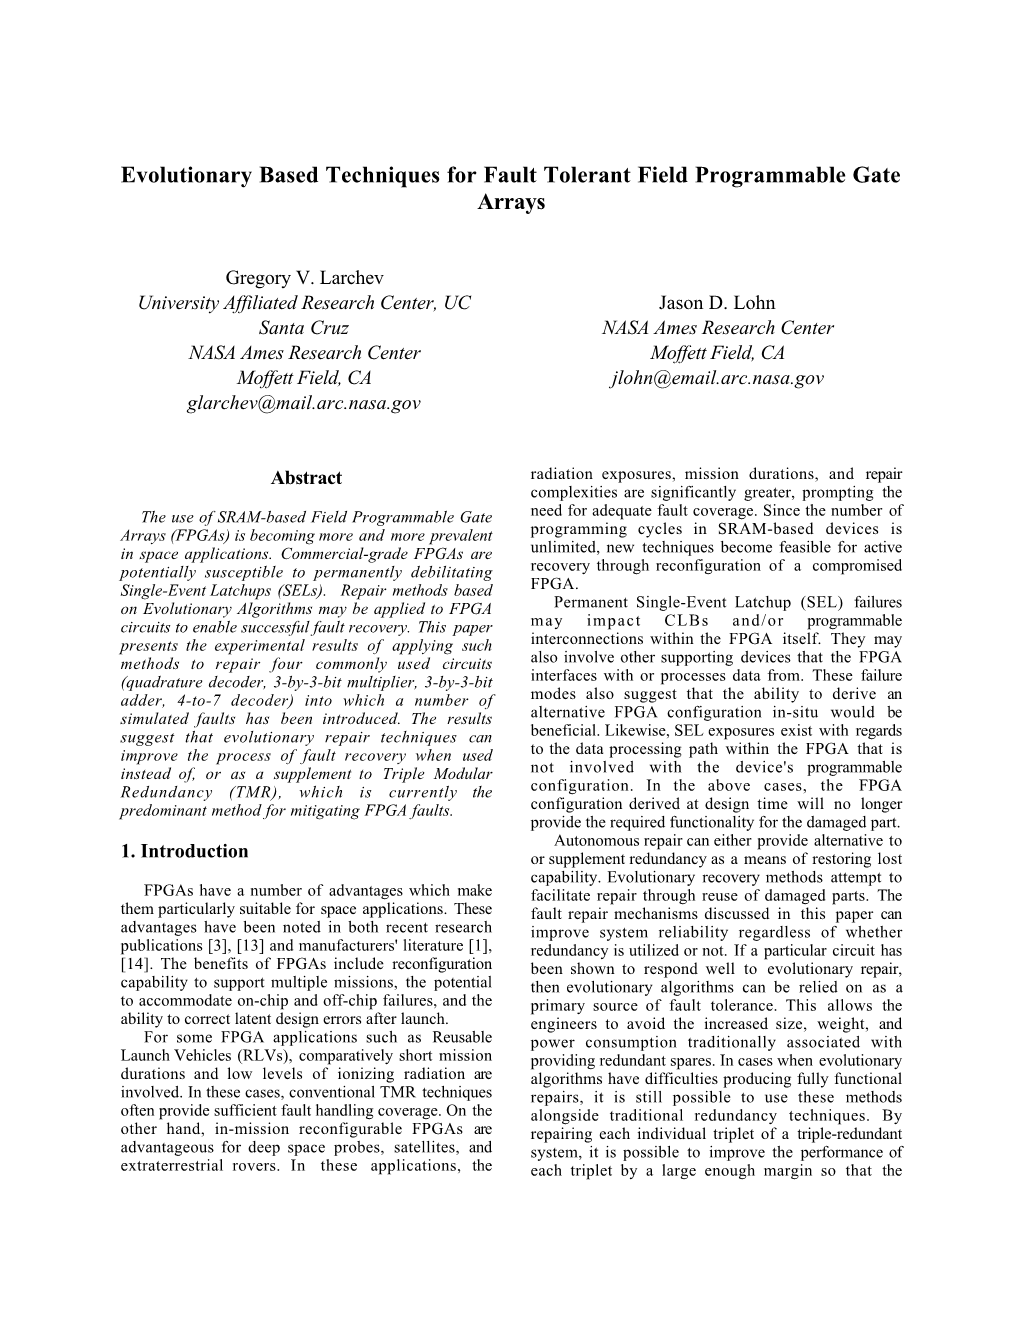 Evolutionary Based Techniques for Fault Tolerant Field Programmable Gate Arrays